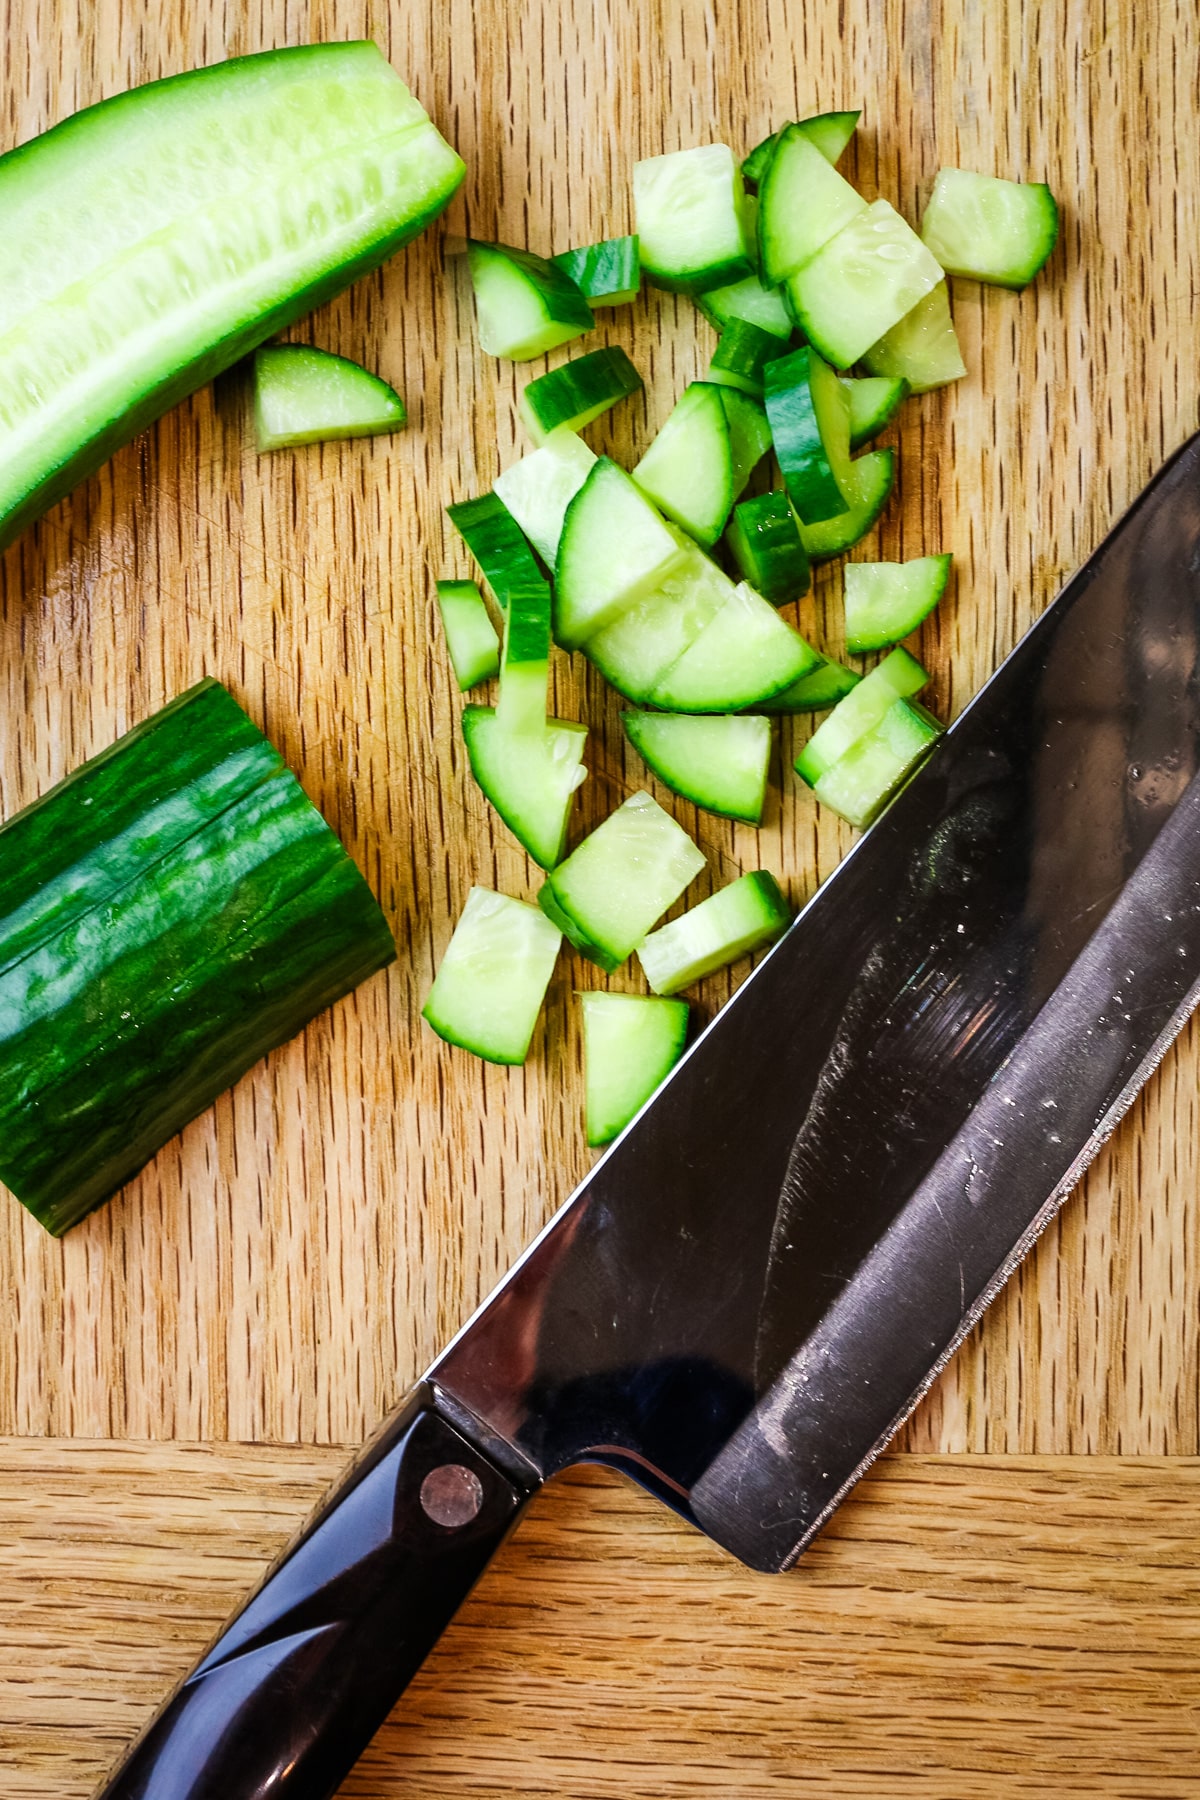 cucumber cut into small pieces or diced.